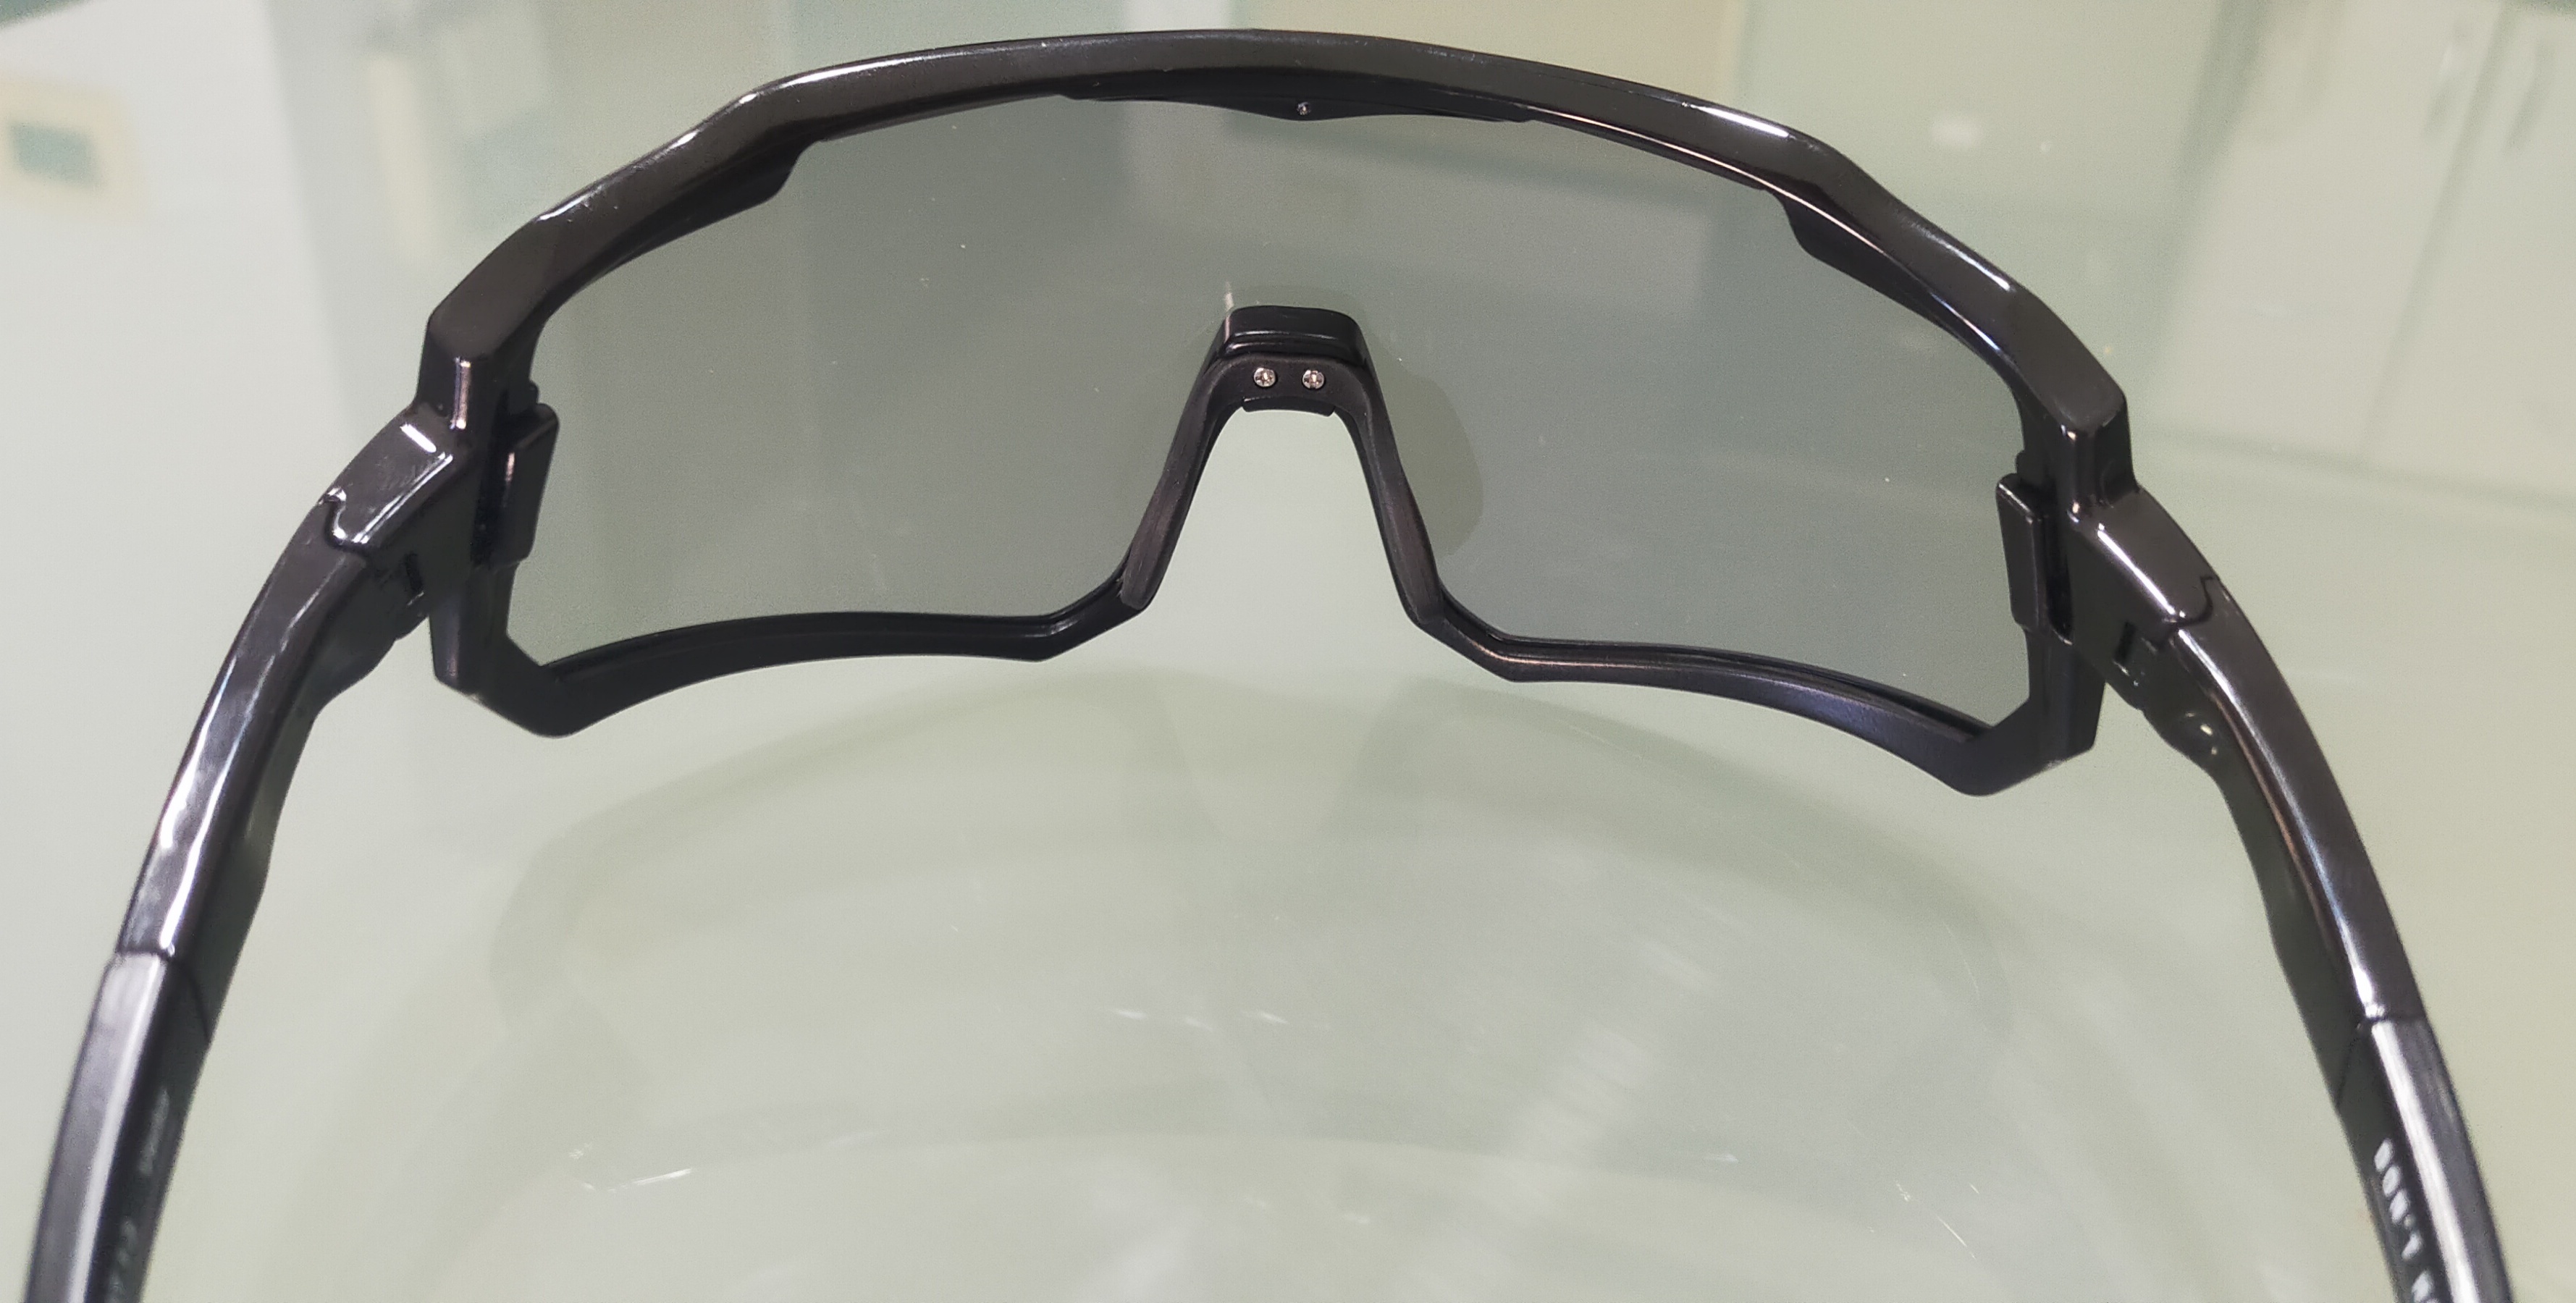 dhb Vector Photochromatic Lens sunglasses review - high performing ...